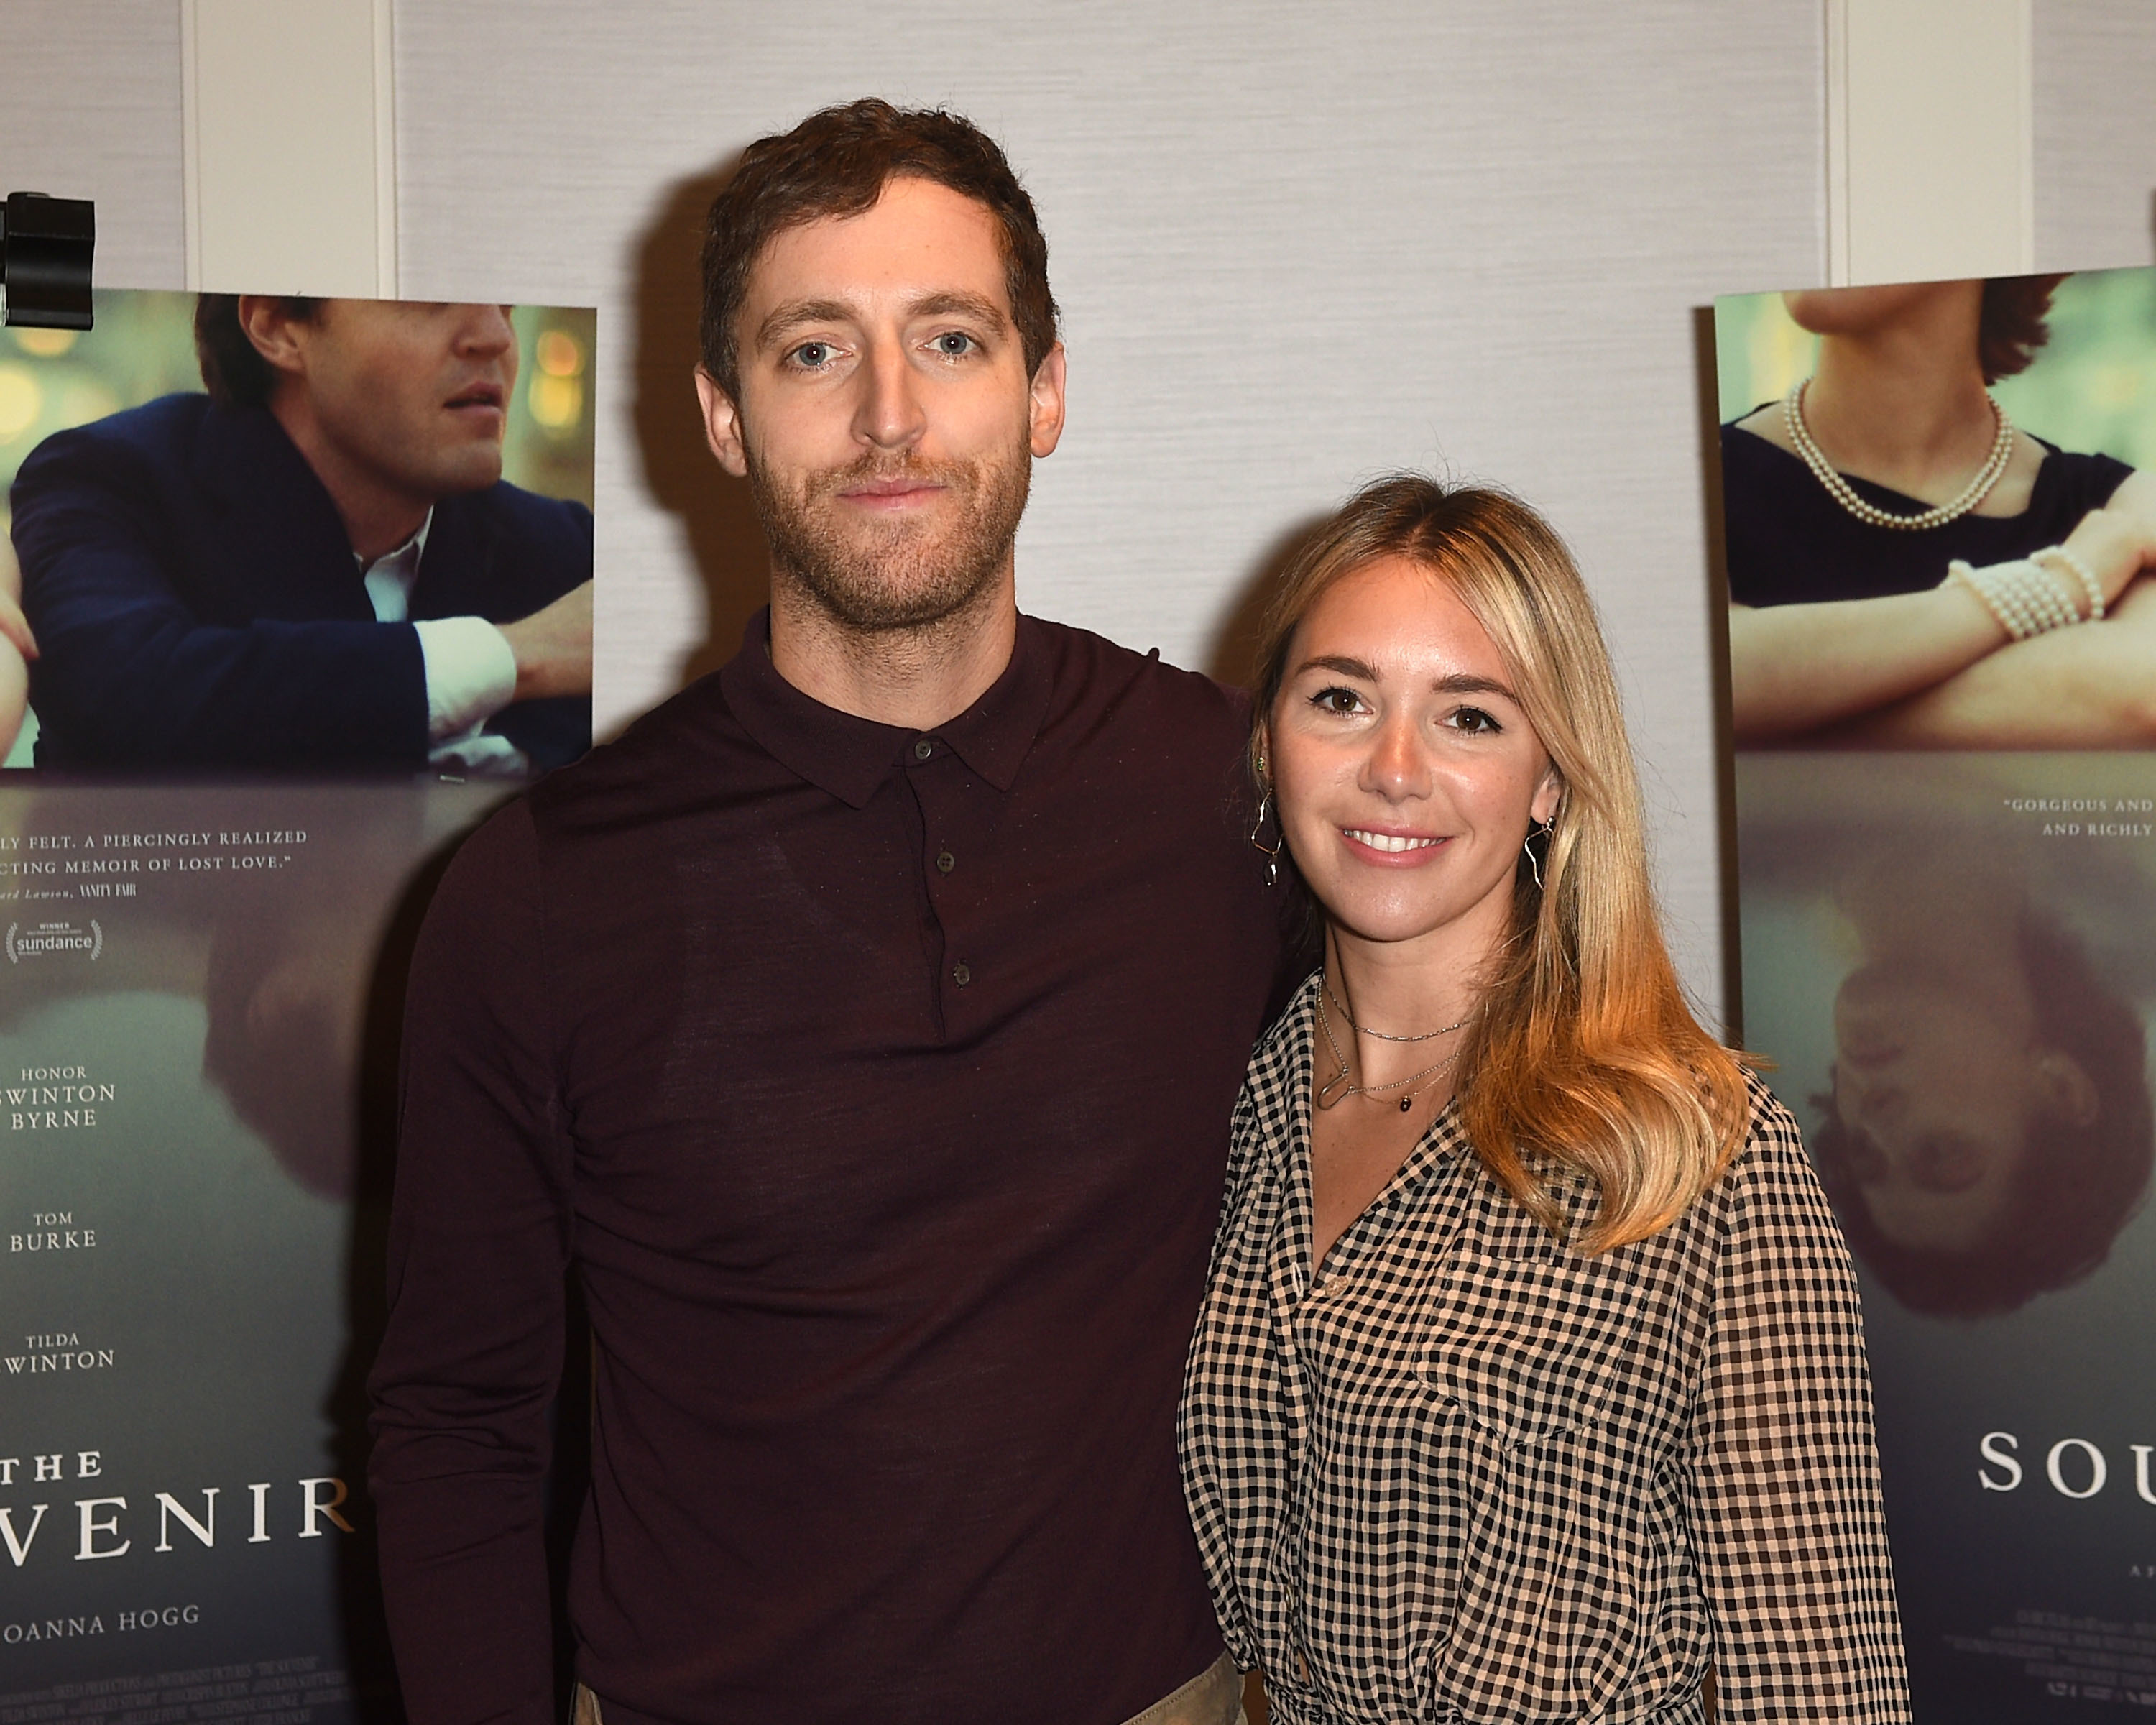 Silicon Valleys Thomas Middleditch says he and wife are swingers Wonderwall pic image